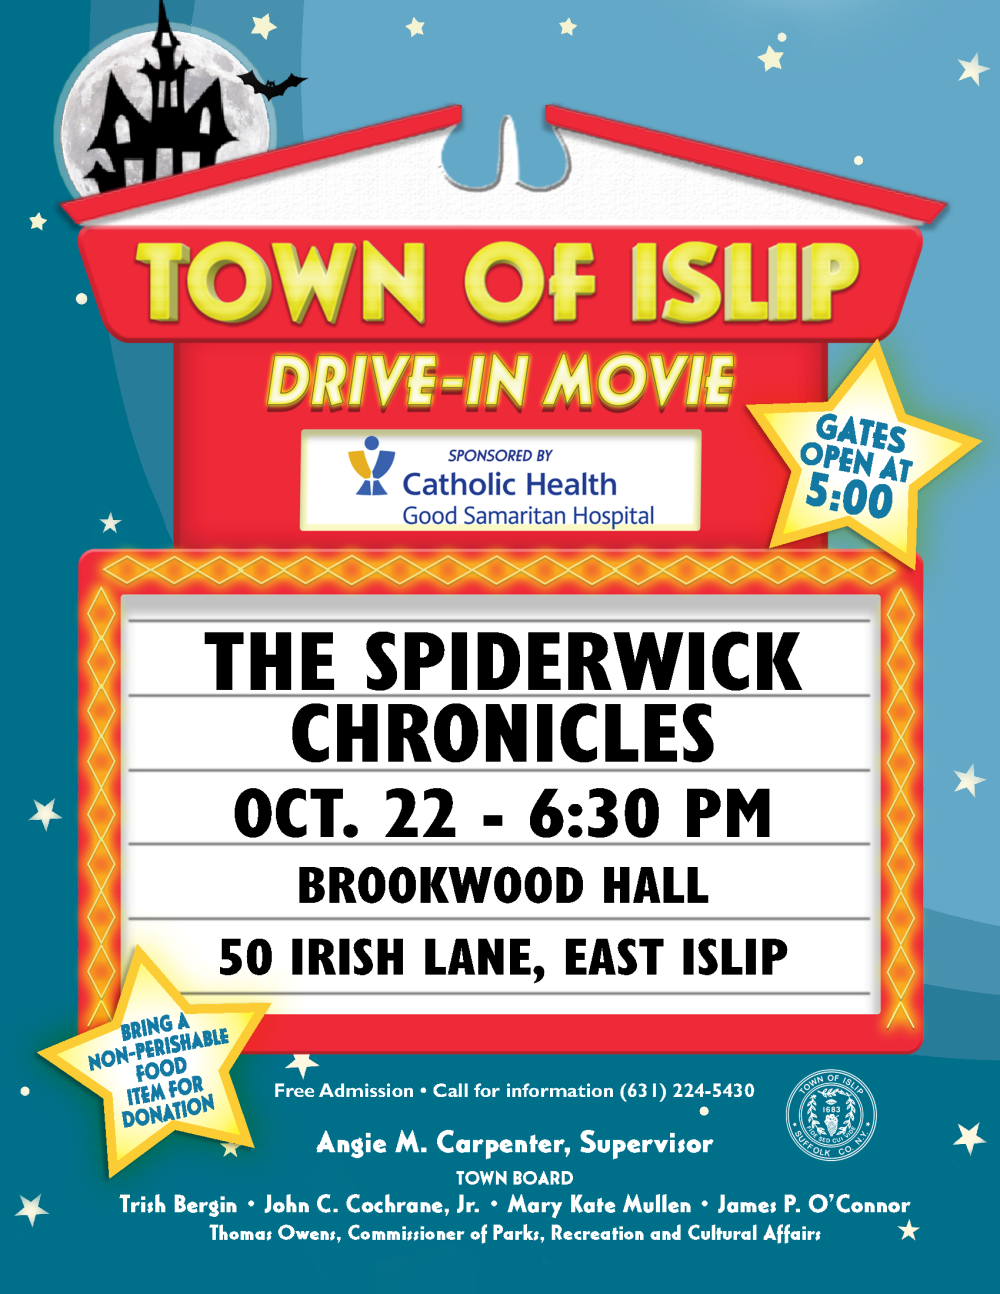 Spiderwick Chronicles, October 22nd, Brookwood Hall, Gates Open 5pm